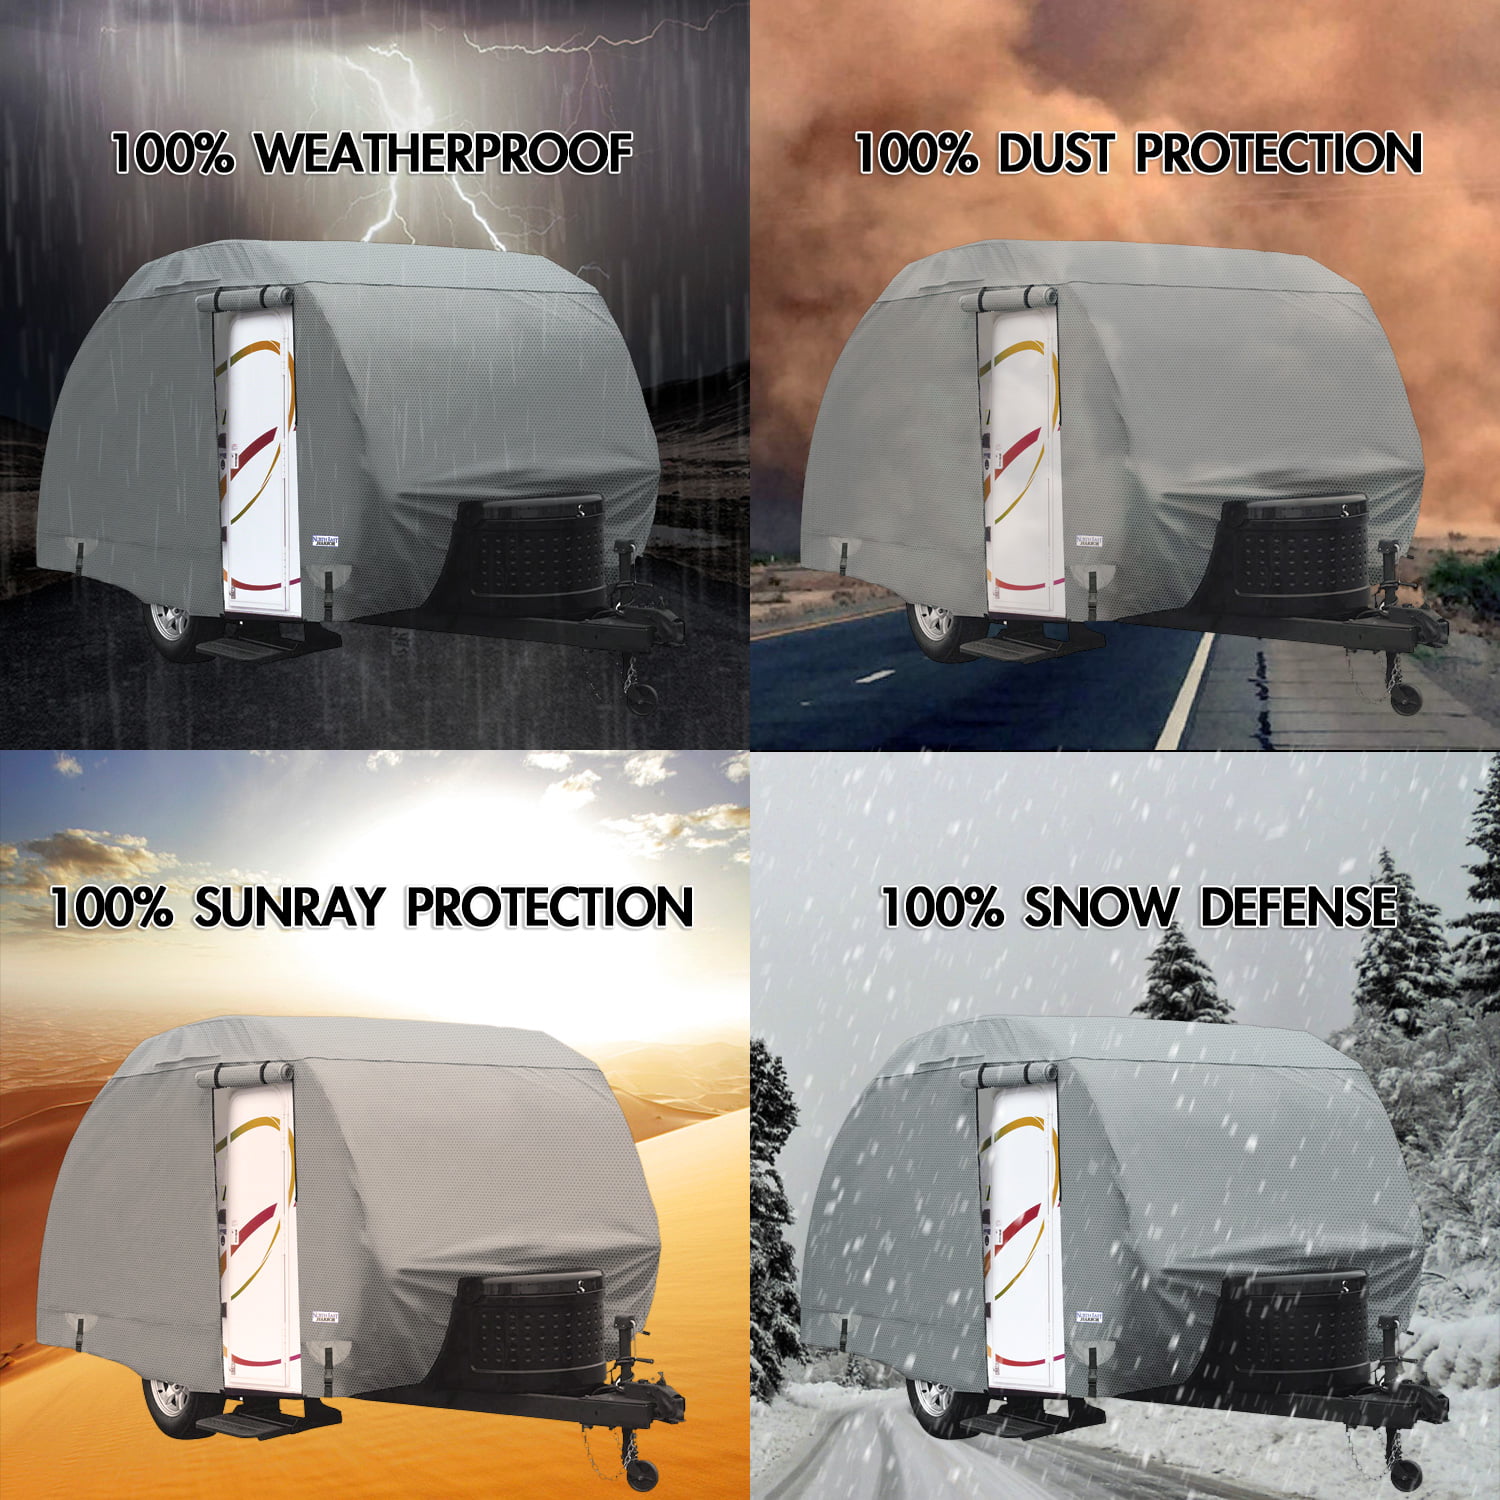 Waterproof Durable Teardrop R-Pod Travel Trailer Storage Cover Fits Up To 18 8 Long and 6 Wide Trailers RP-176 and RP-177 RP-172 RP-176T Direct Fitment for Forest River R-Pod Model RP-171